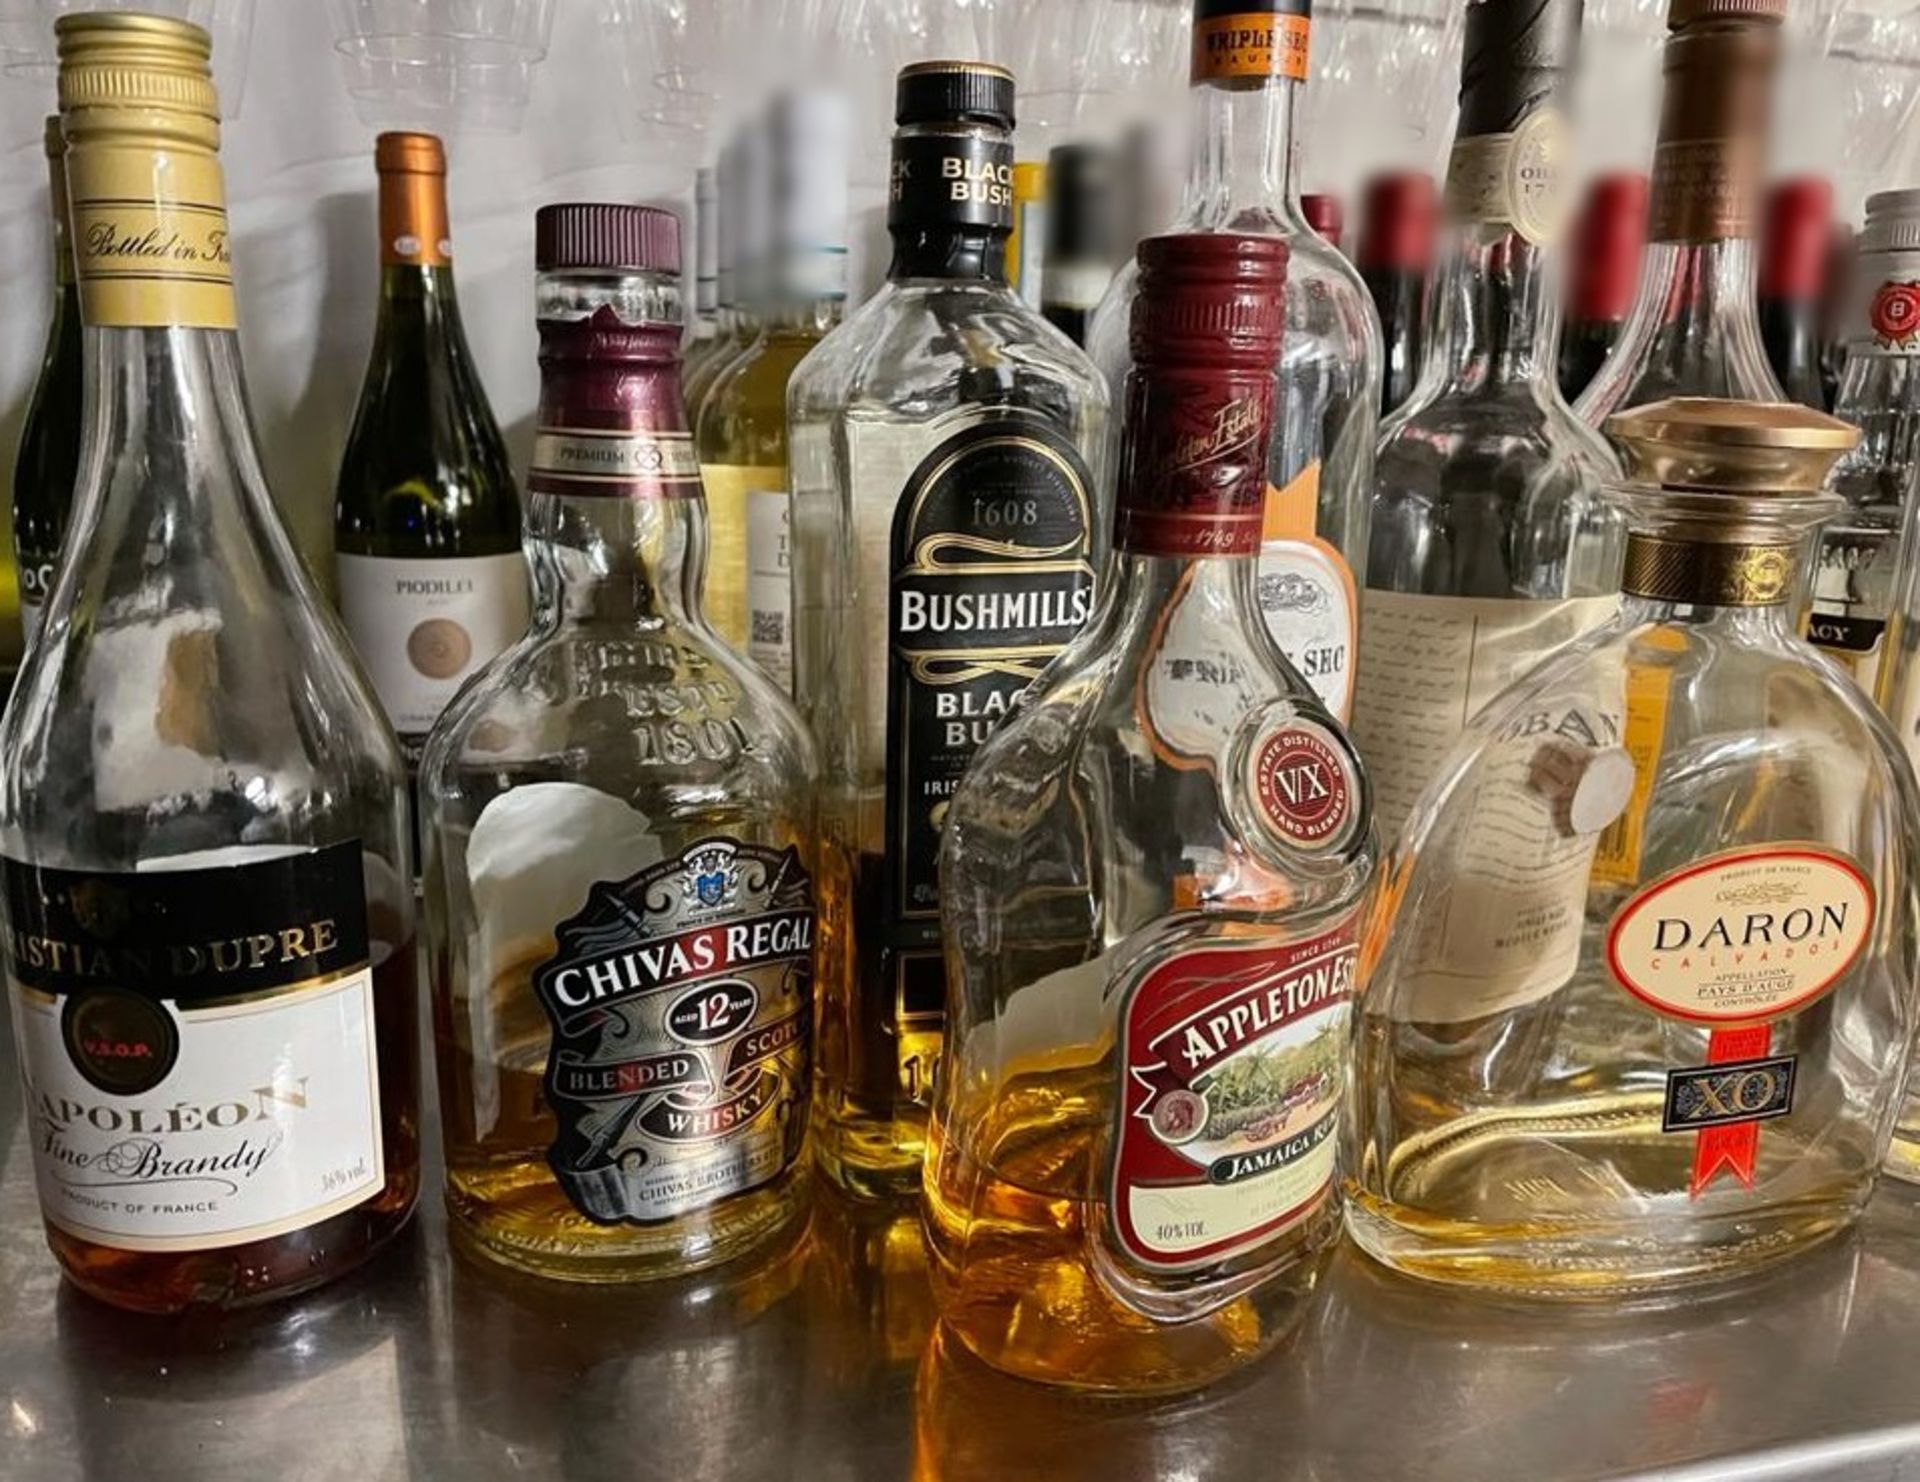 25 x Assorted Bottles Of Open Spirits And Liquers - Selection As Shown - Restaurant Stock - Ref: - Image 3 of 5